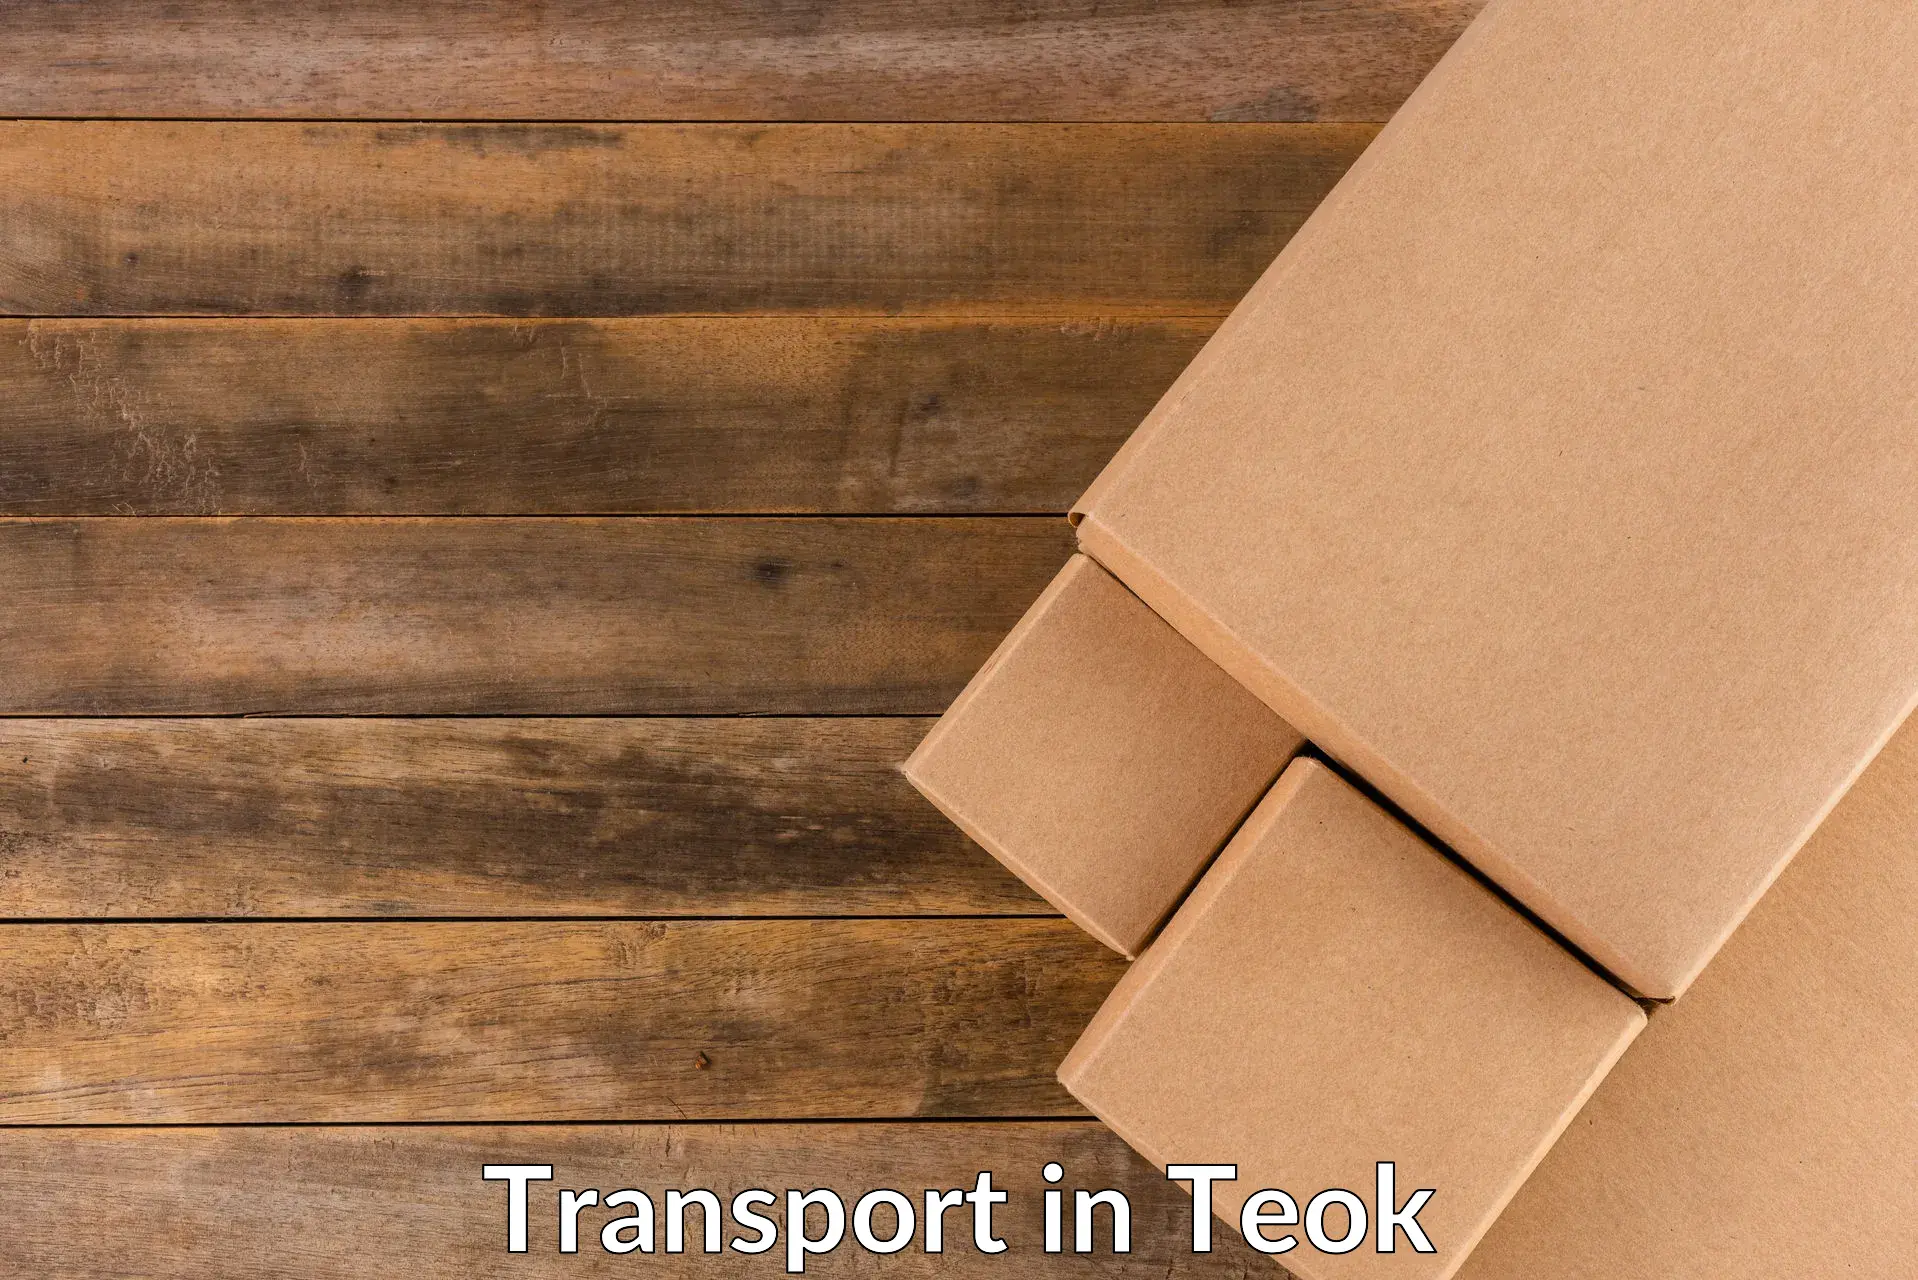 Vehicle transport services in Teok